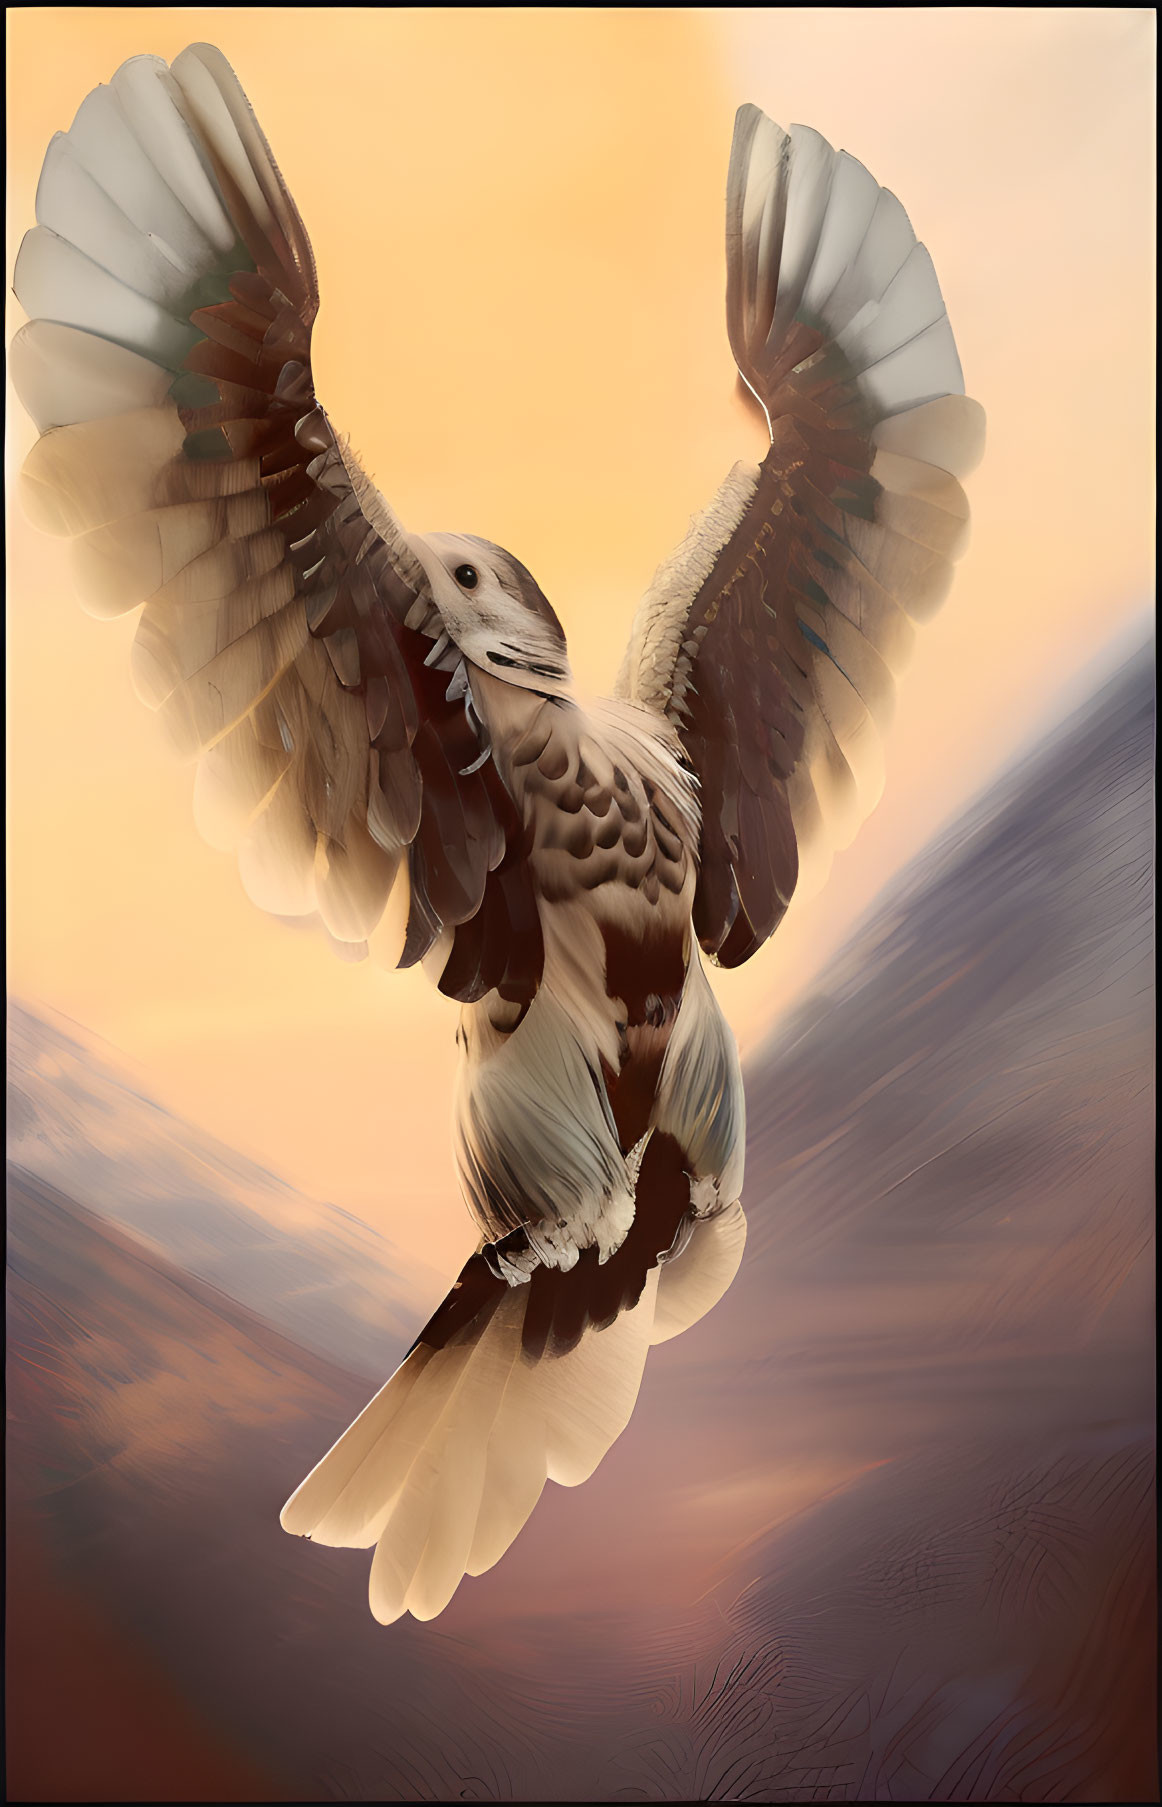 Majestic eagle flying in sunset sky over mountains